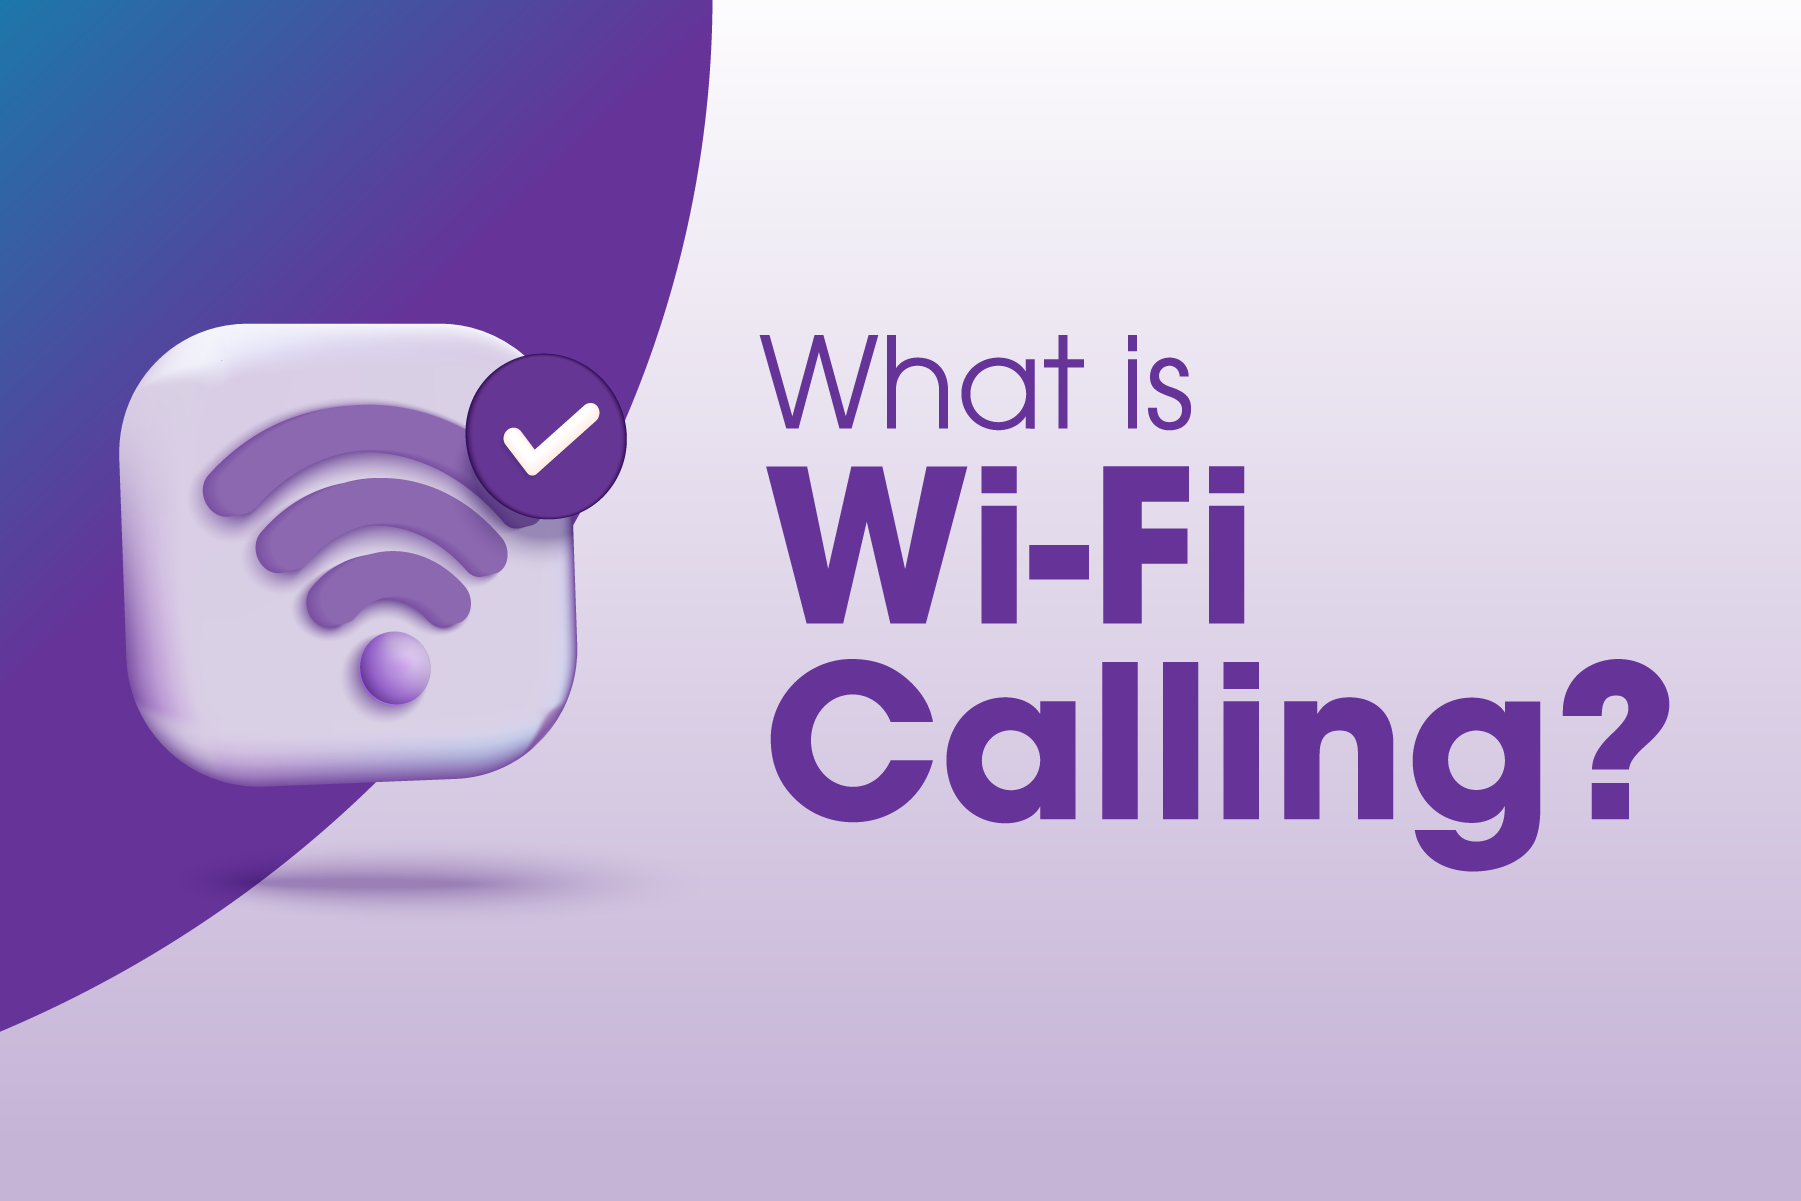 What is Wi-Fi Calling?